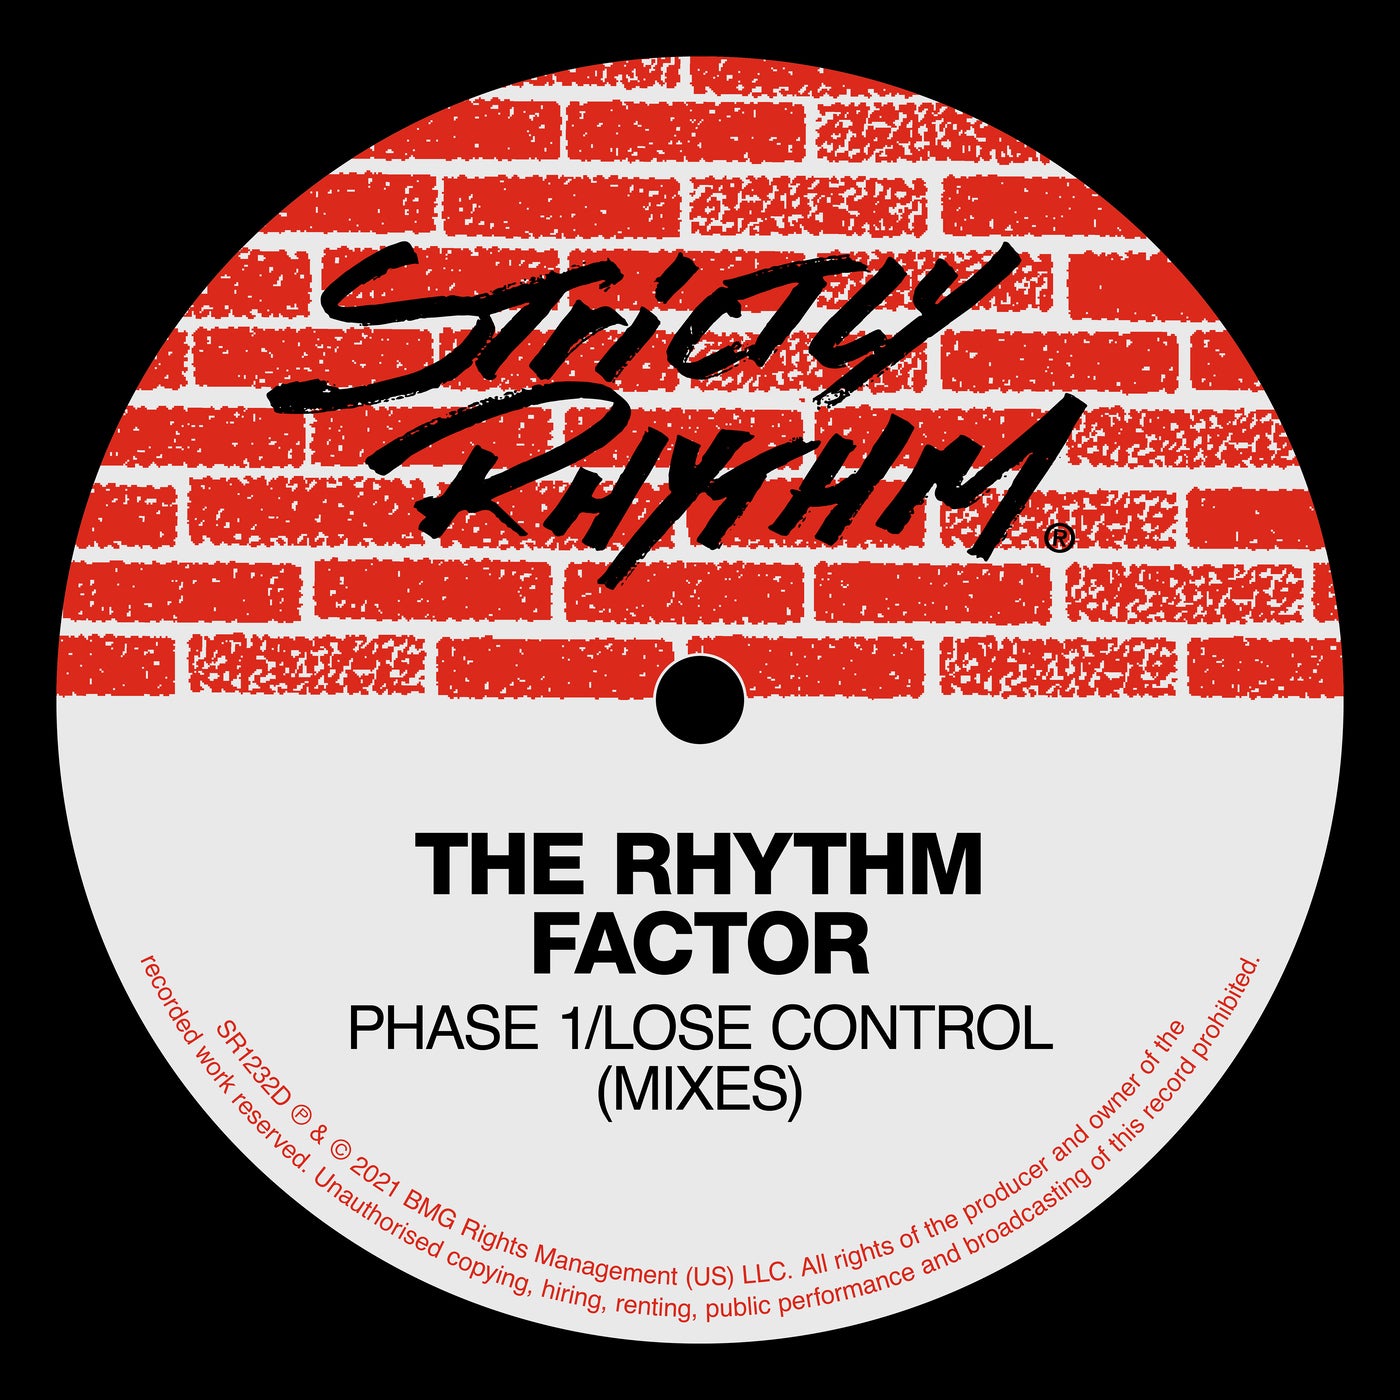 Phase 1 / Lose Control (Mixes)